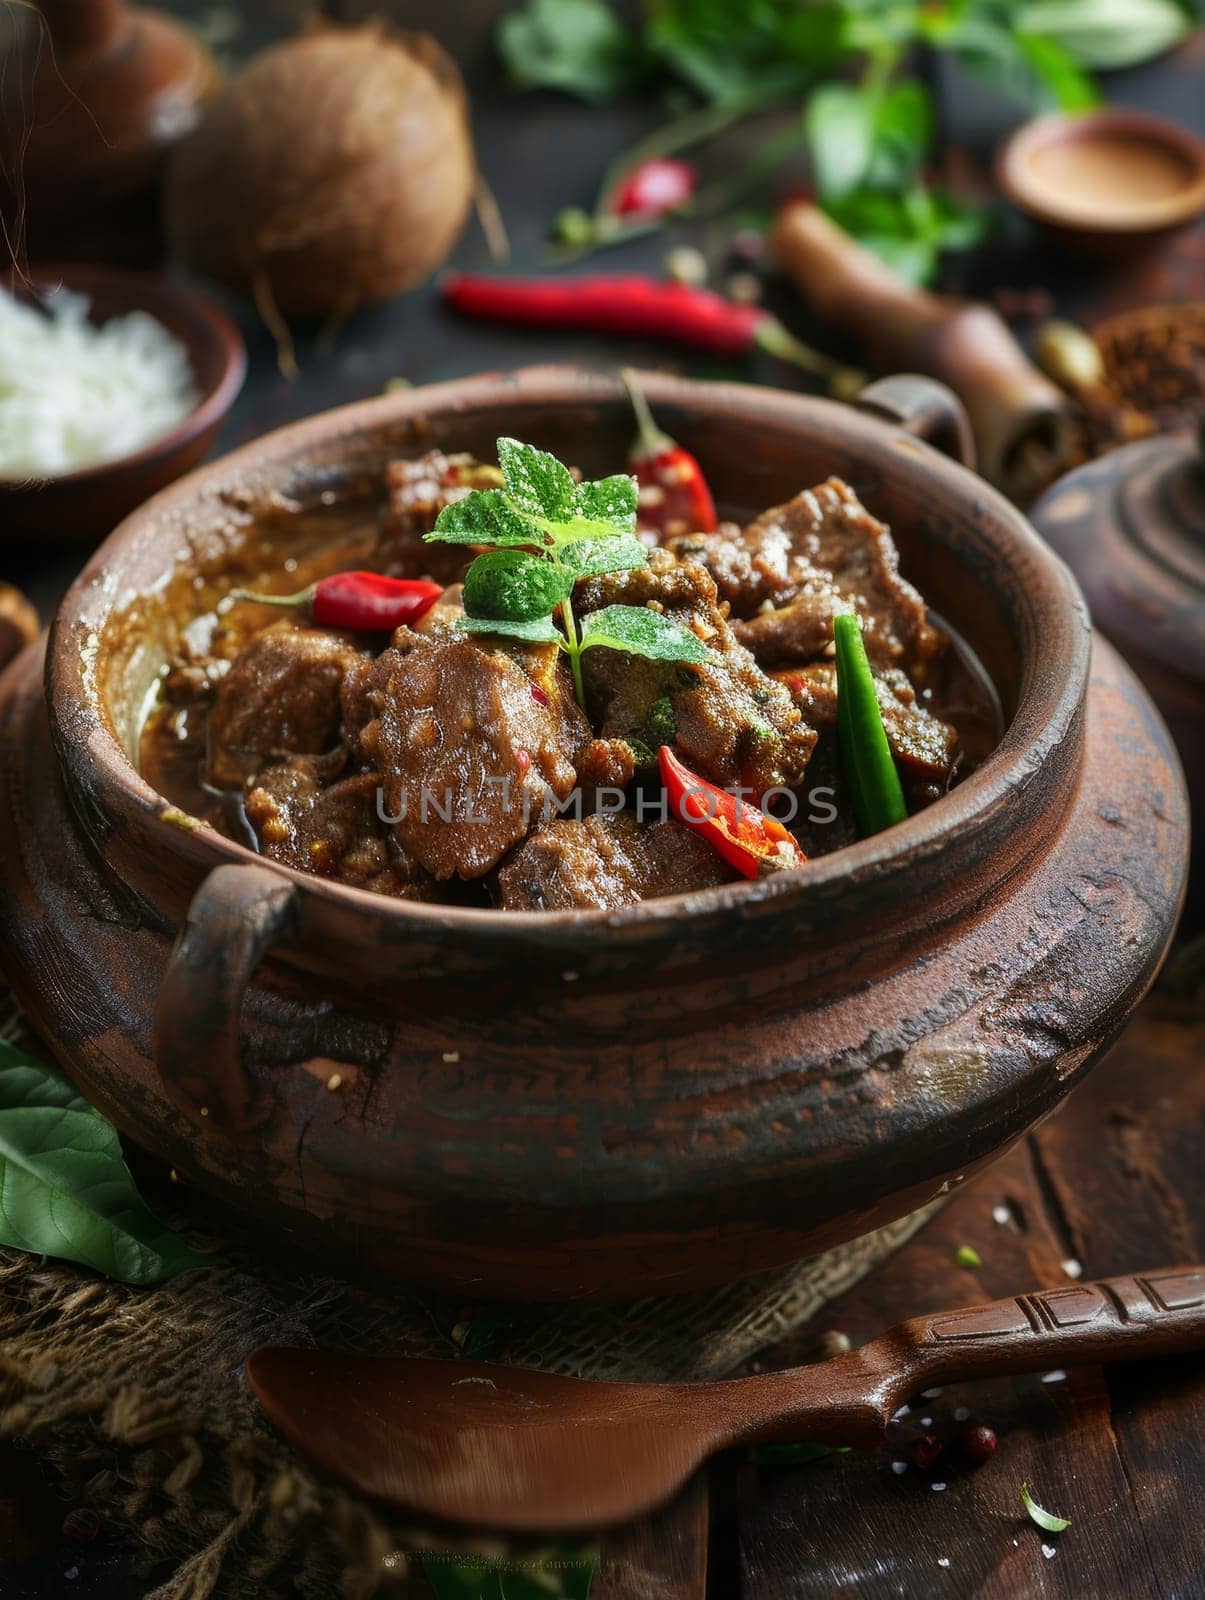 Authentic Indonesian rendang, a slow-cooked beef dish simmered in a rich coconut milk and spice-infused curry. This fragrant, tender, and flavorful Southeast Asian staple represents vibrant culinary